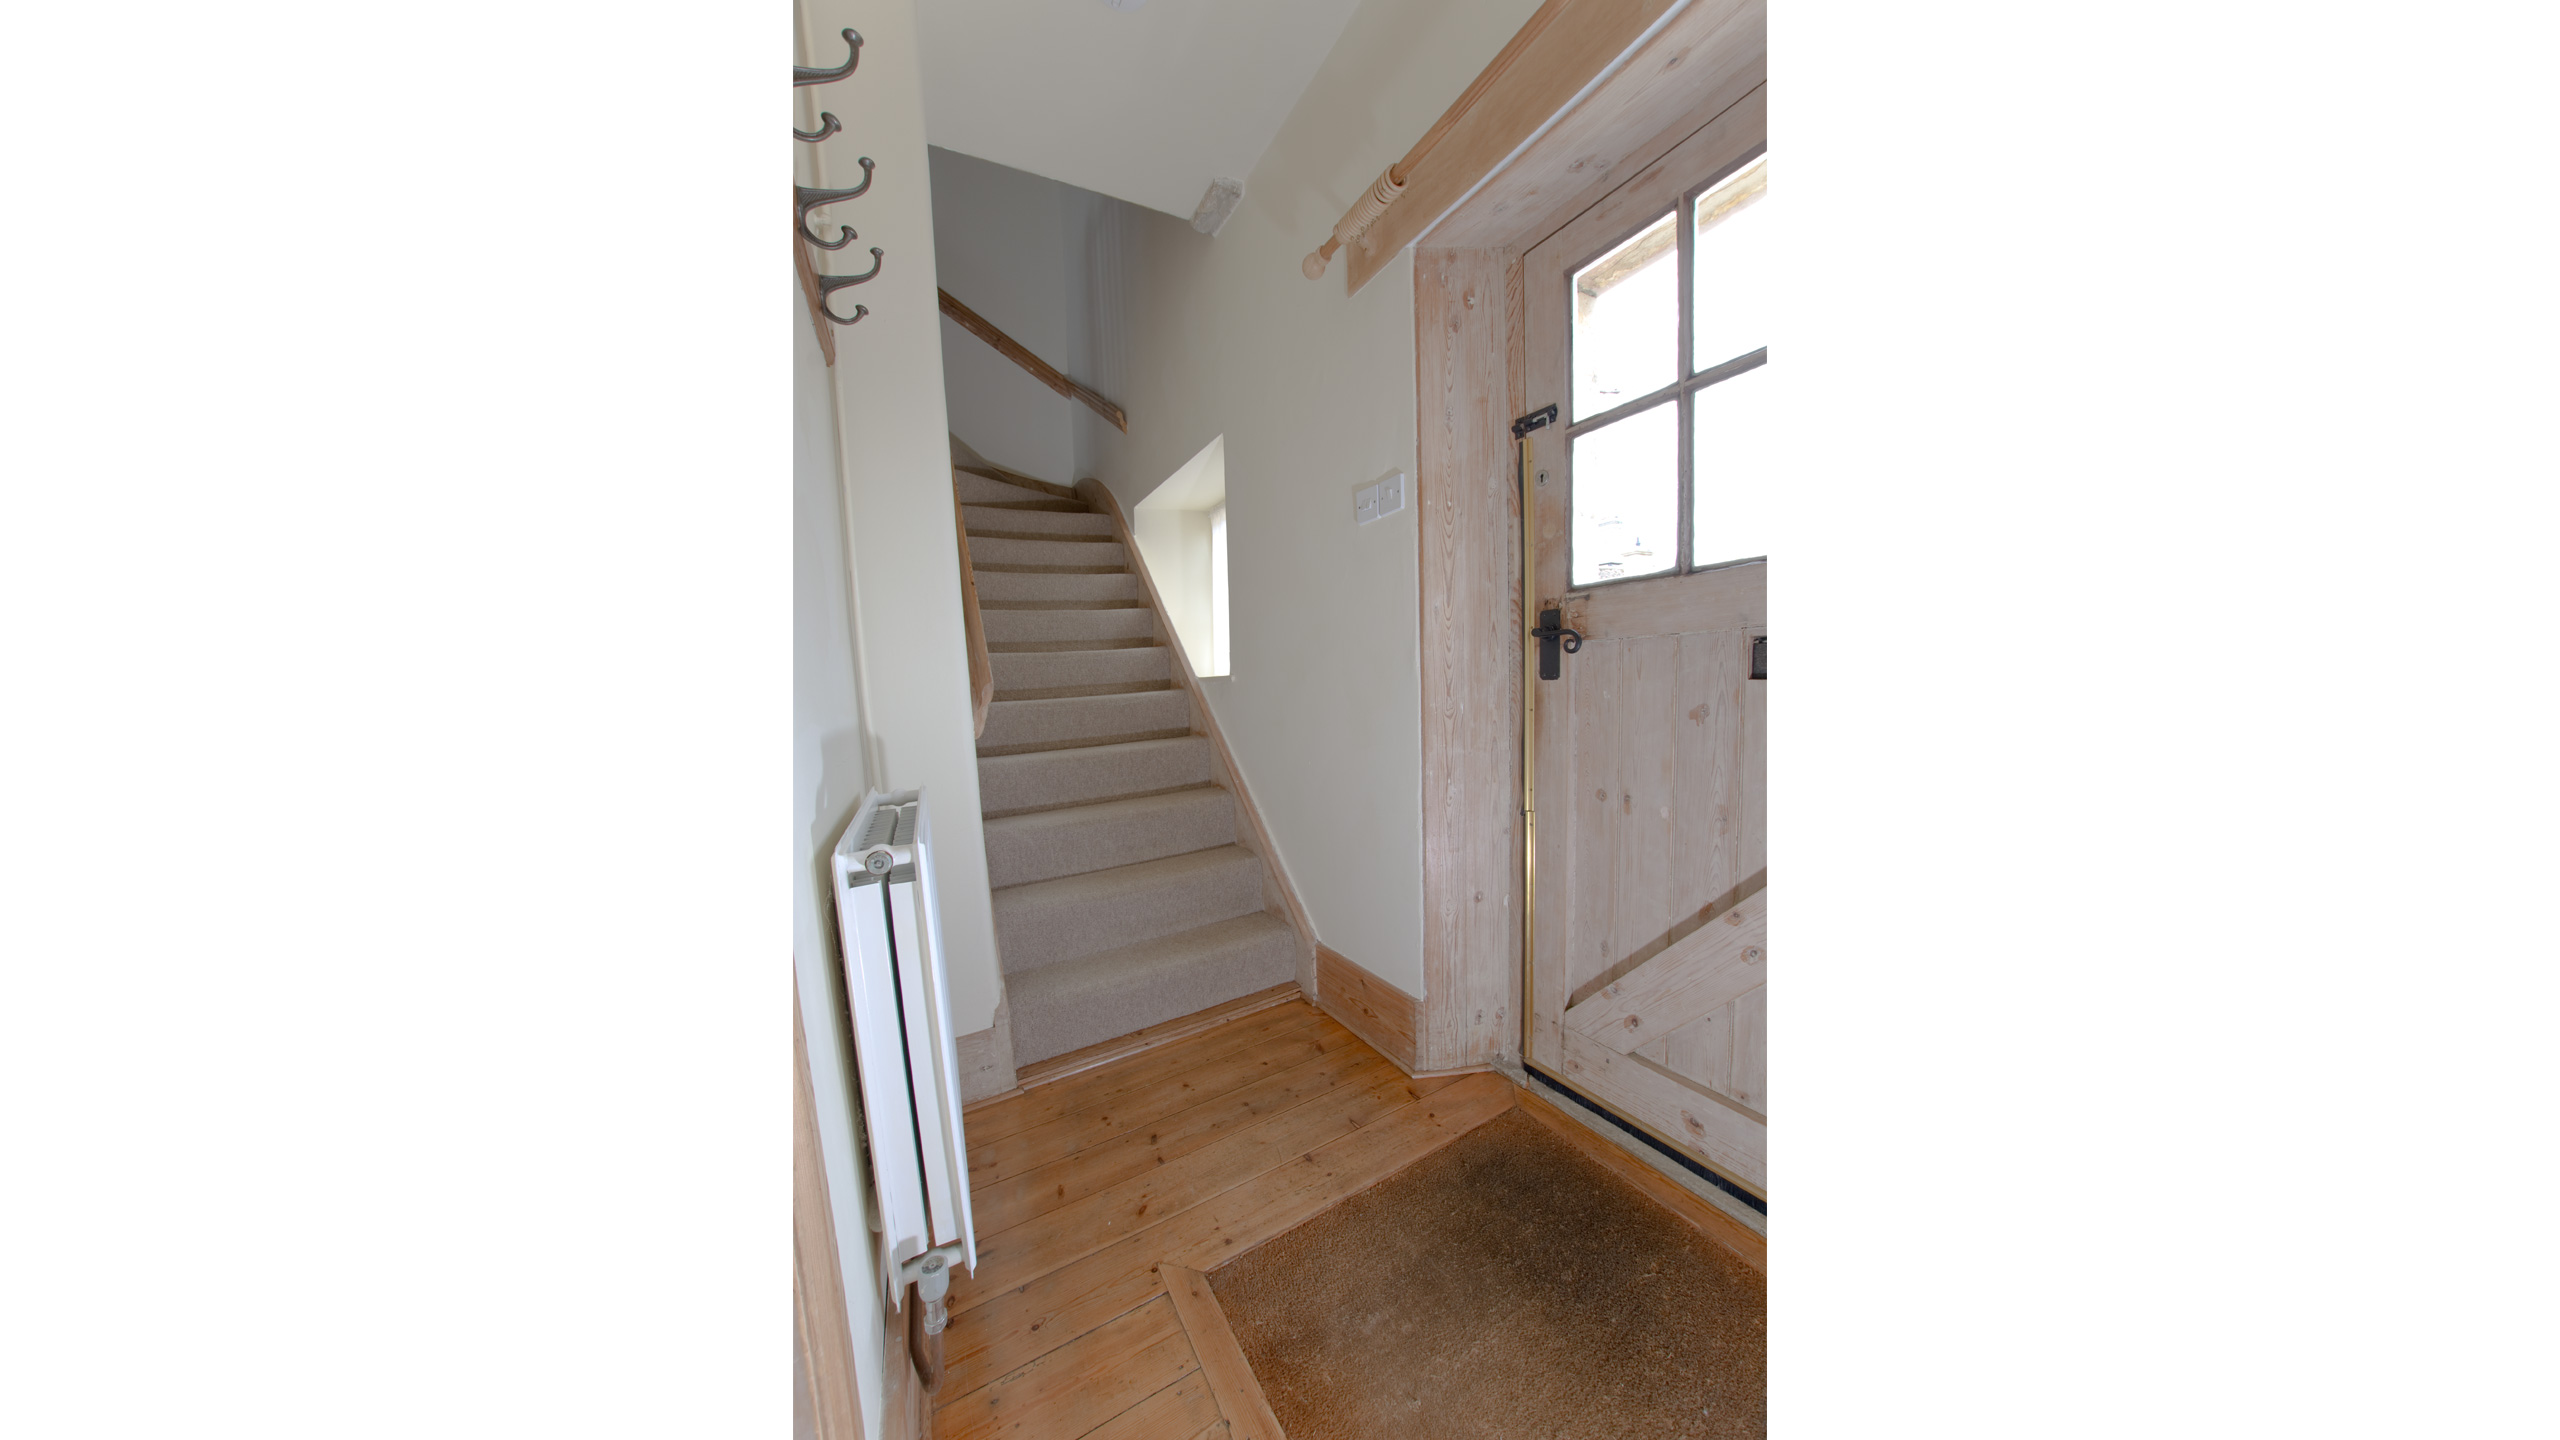 Gardeners Cottage Entrance Hallway & Stairs To Landing